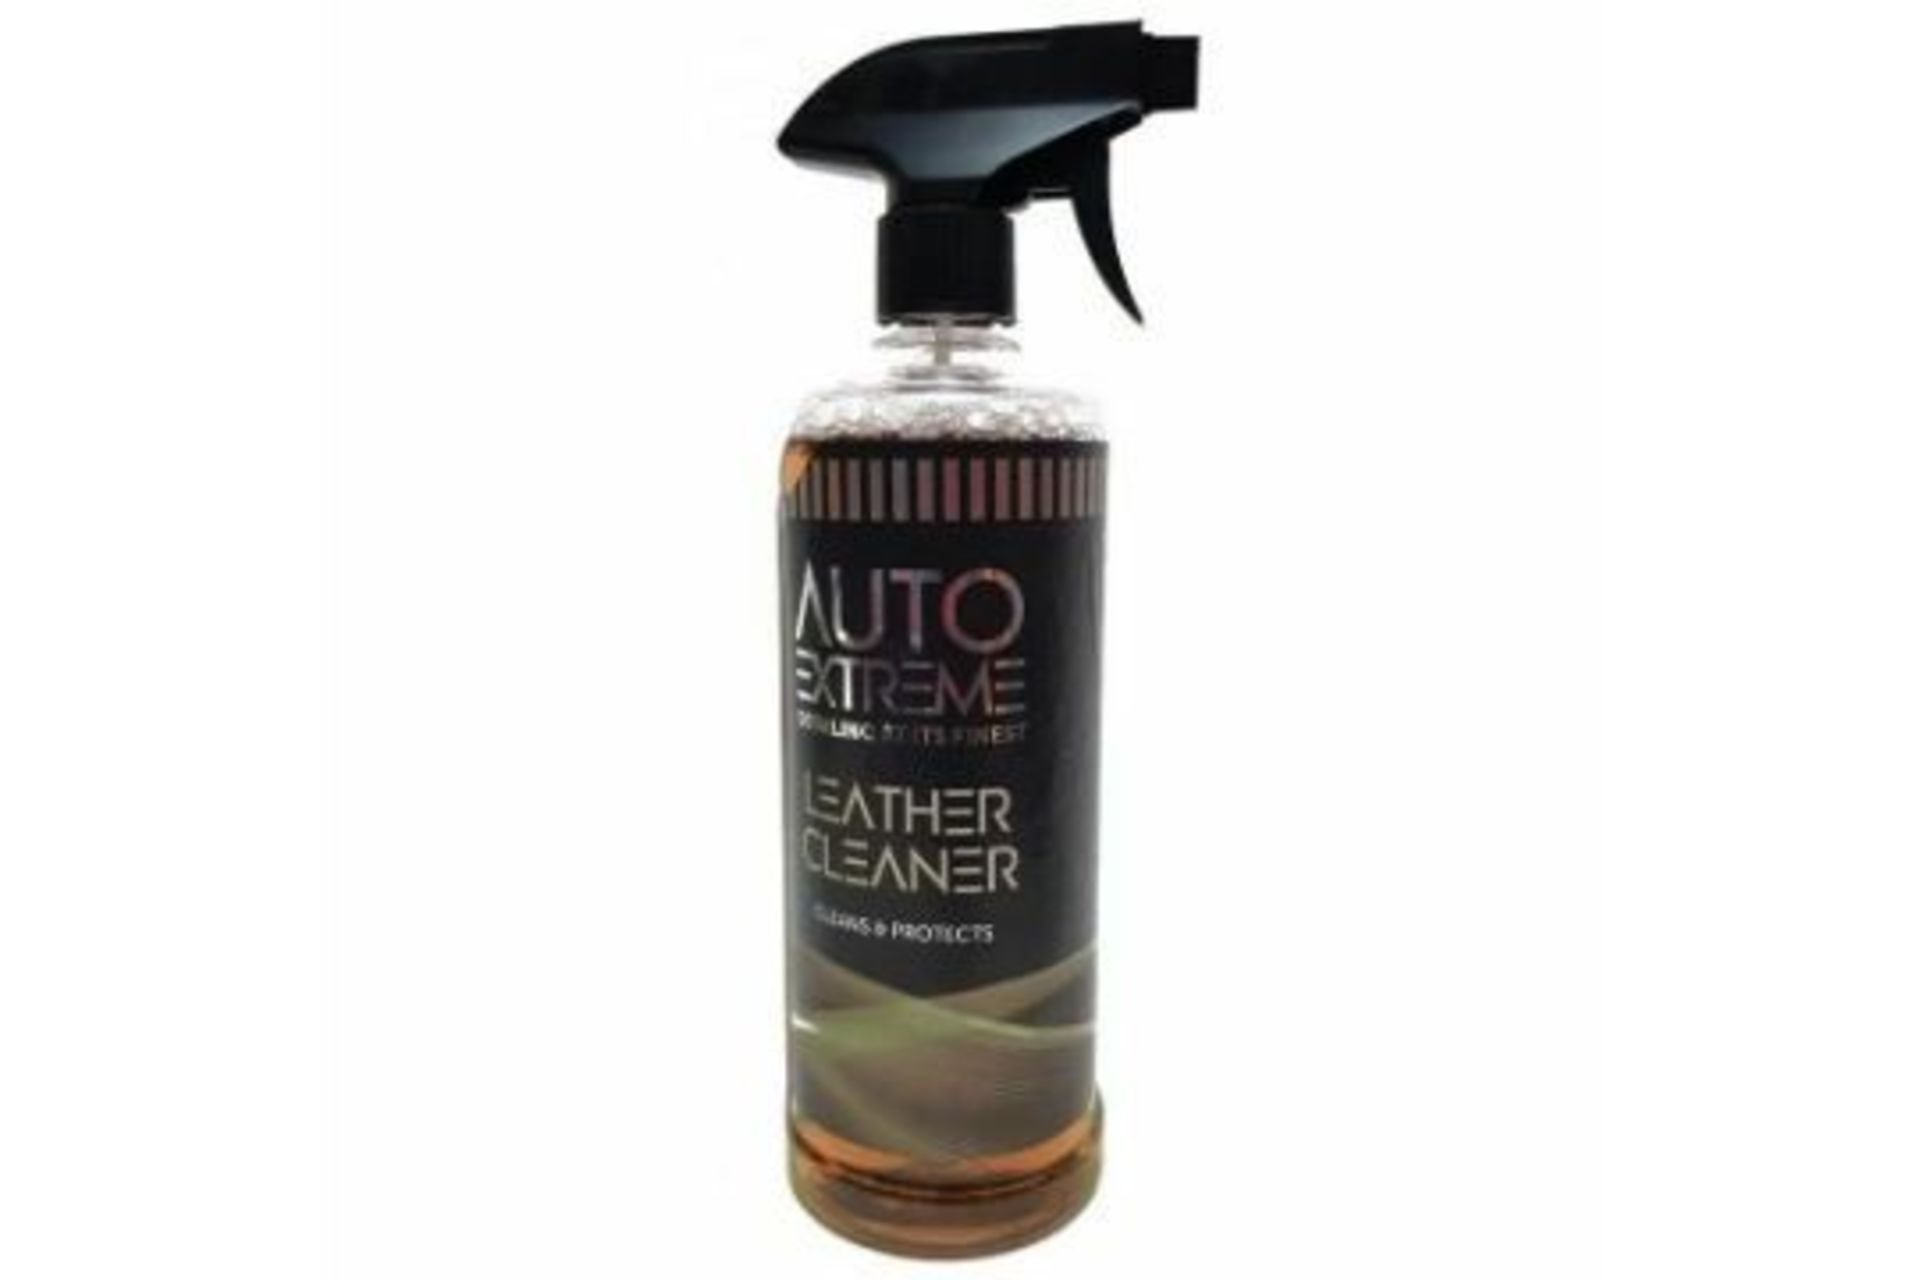 BRAND NEW BOTTLE OF AUTO EXTREME LEATHER CLEANER 720ML